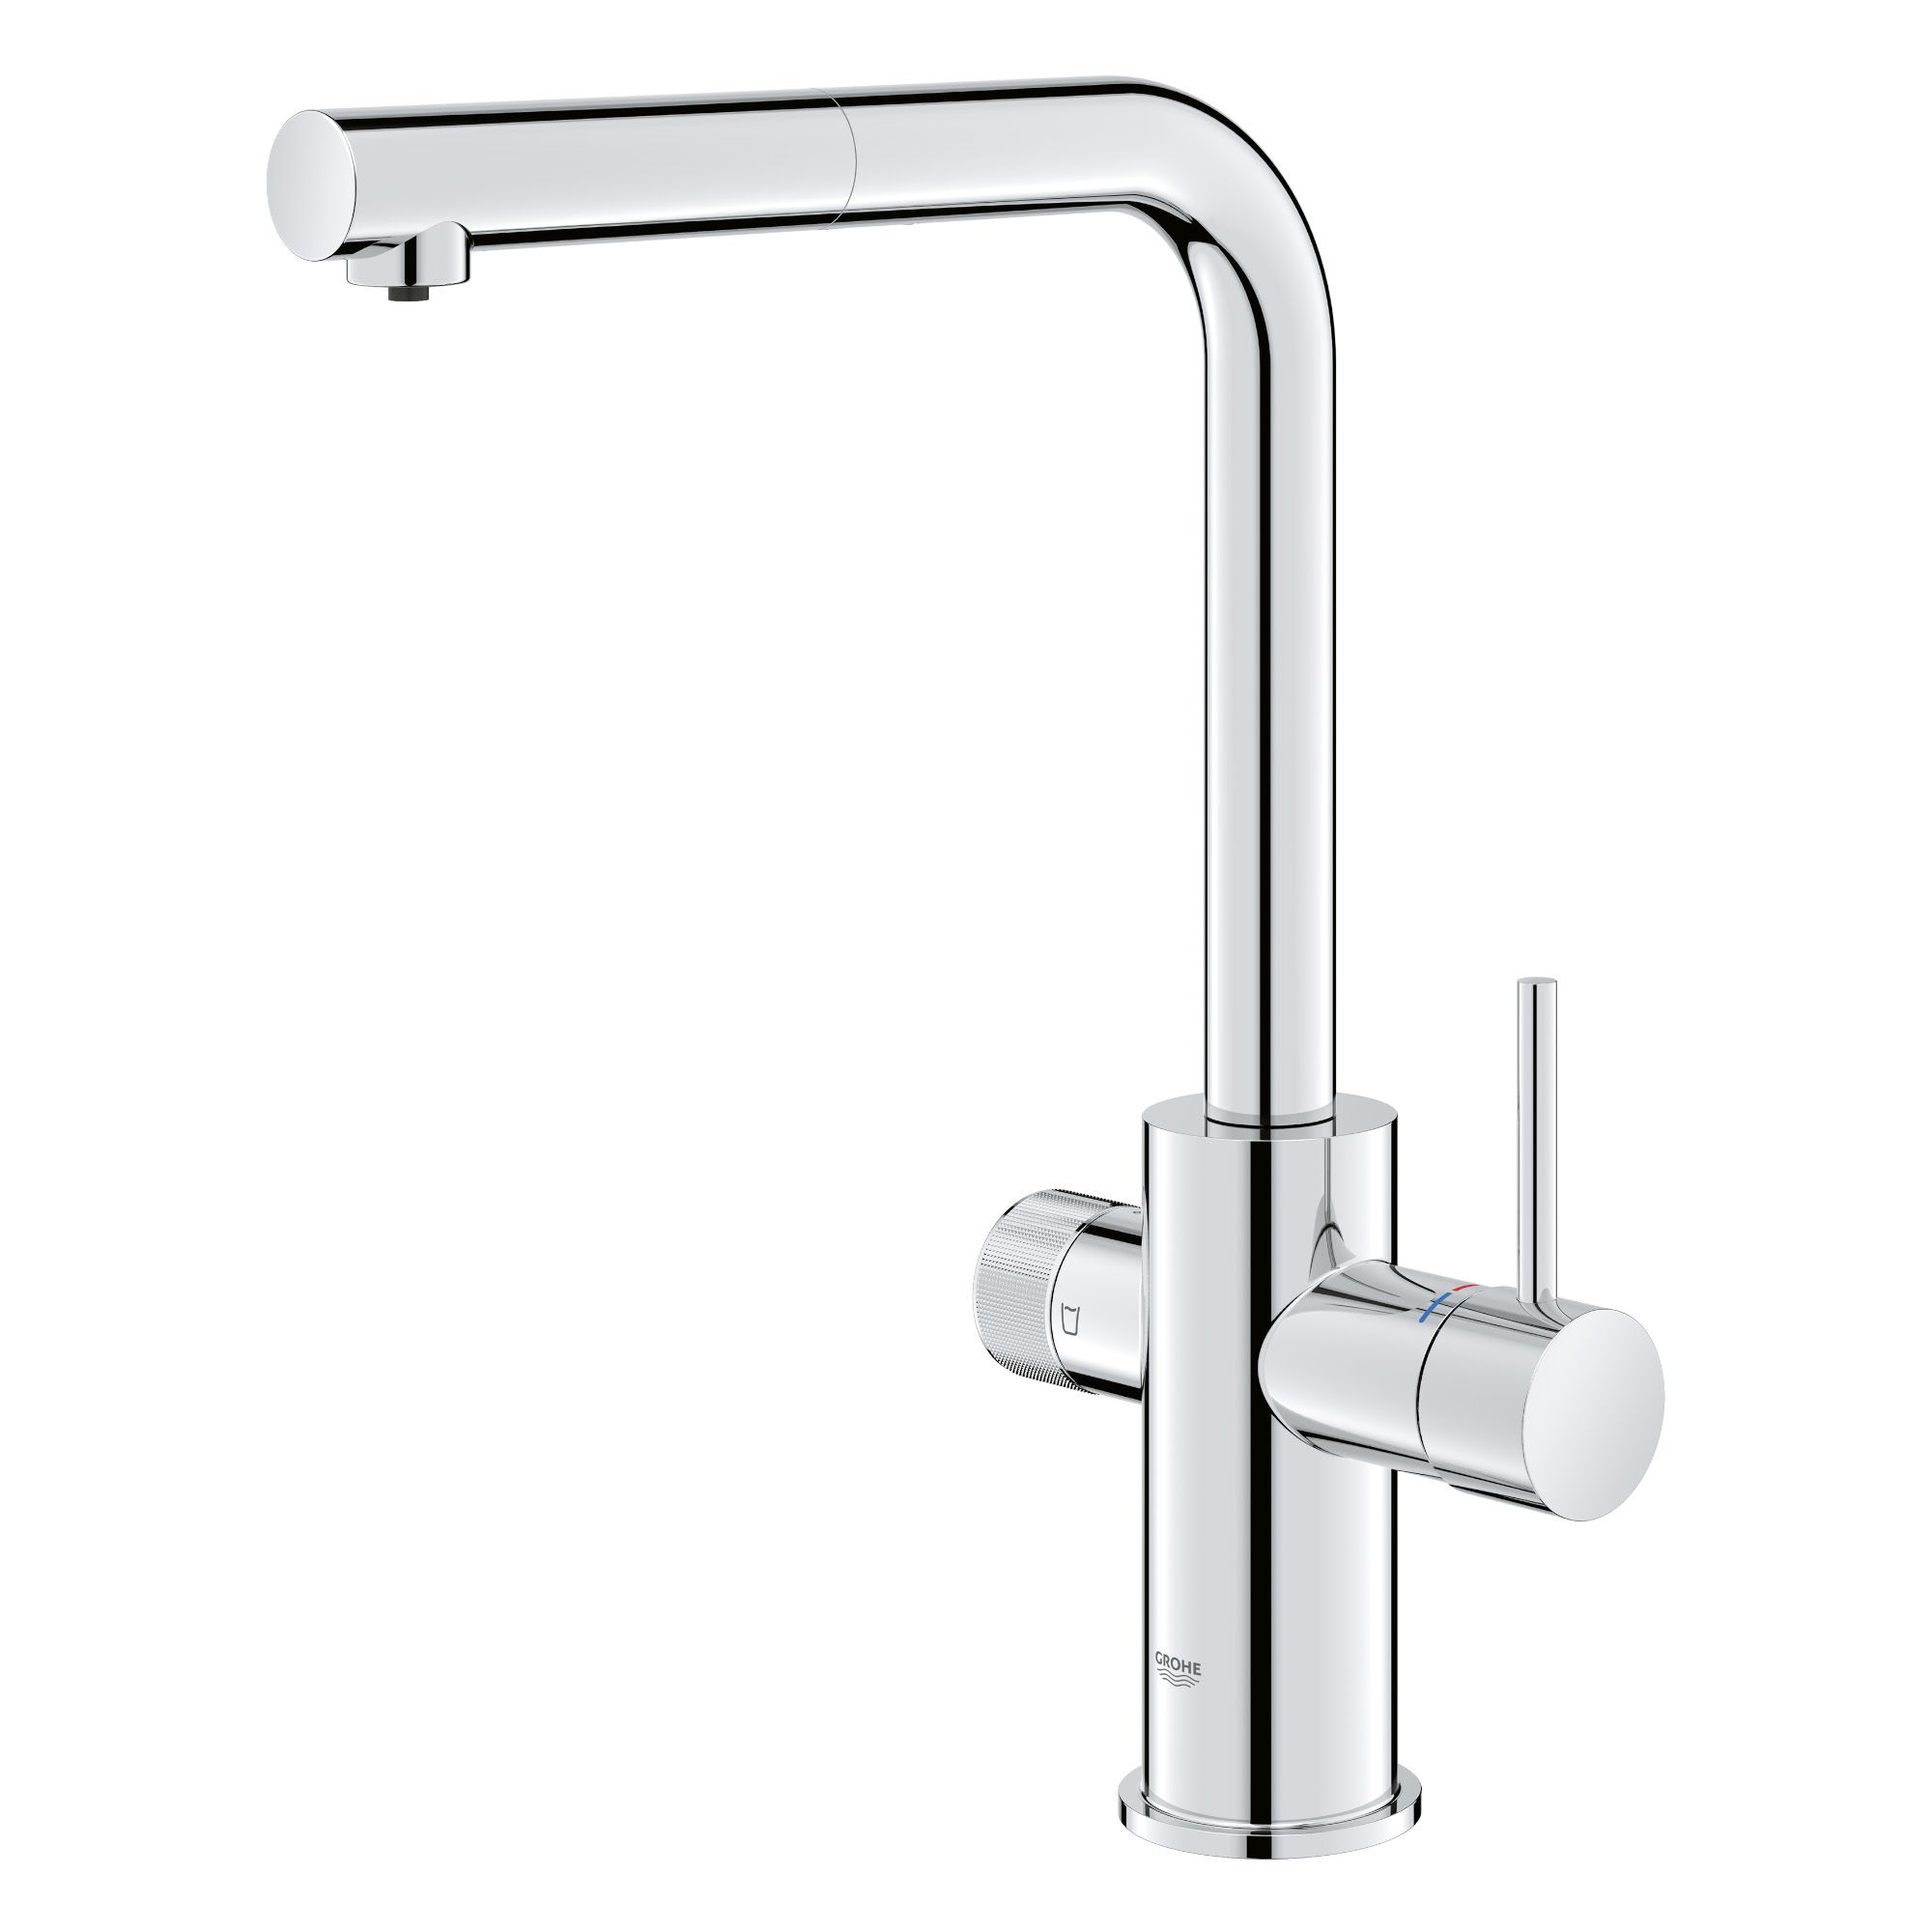 Grohe BLUE PURE MINTA Chrome effect Chrome-plated Kitchen Pull-out spray mono mixer Tap